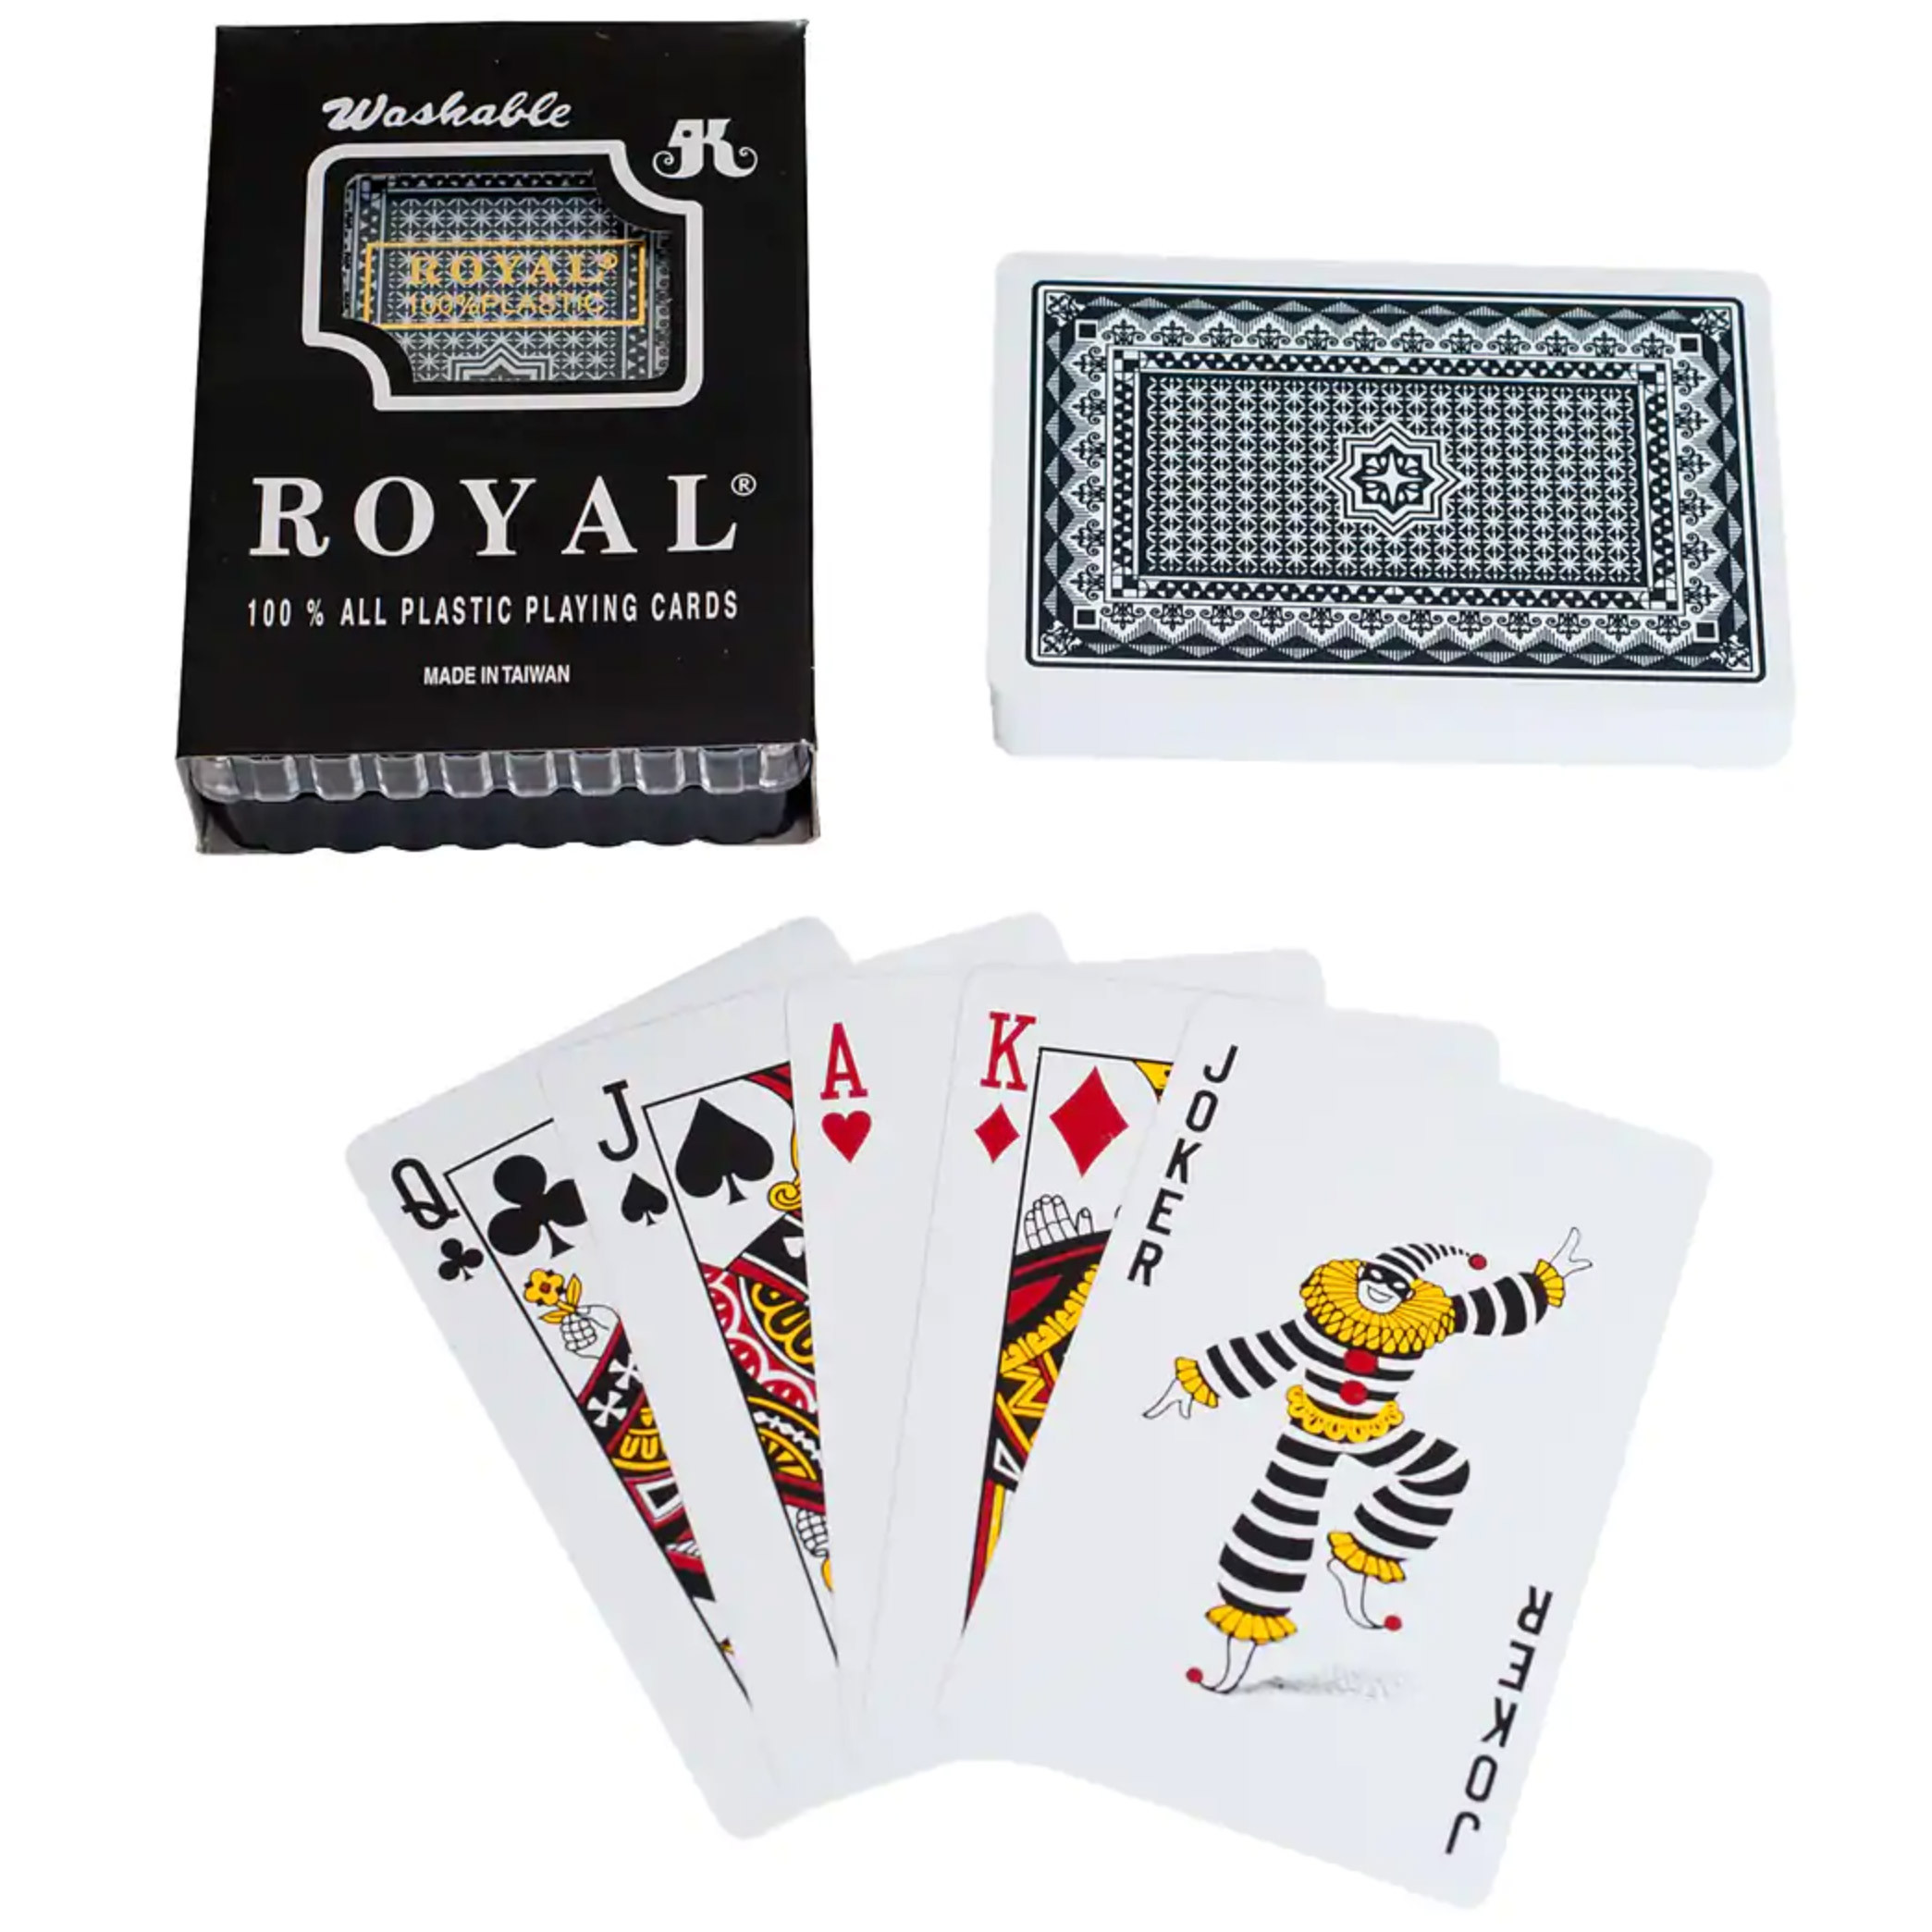 Royal Plastic Playing Cards: Single Deck